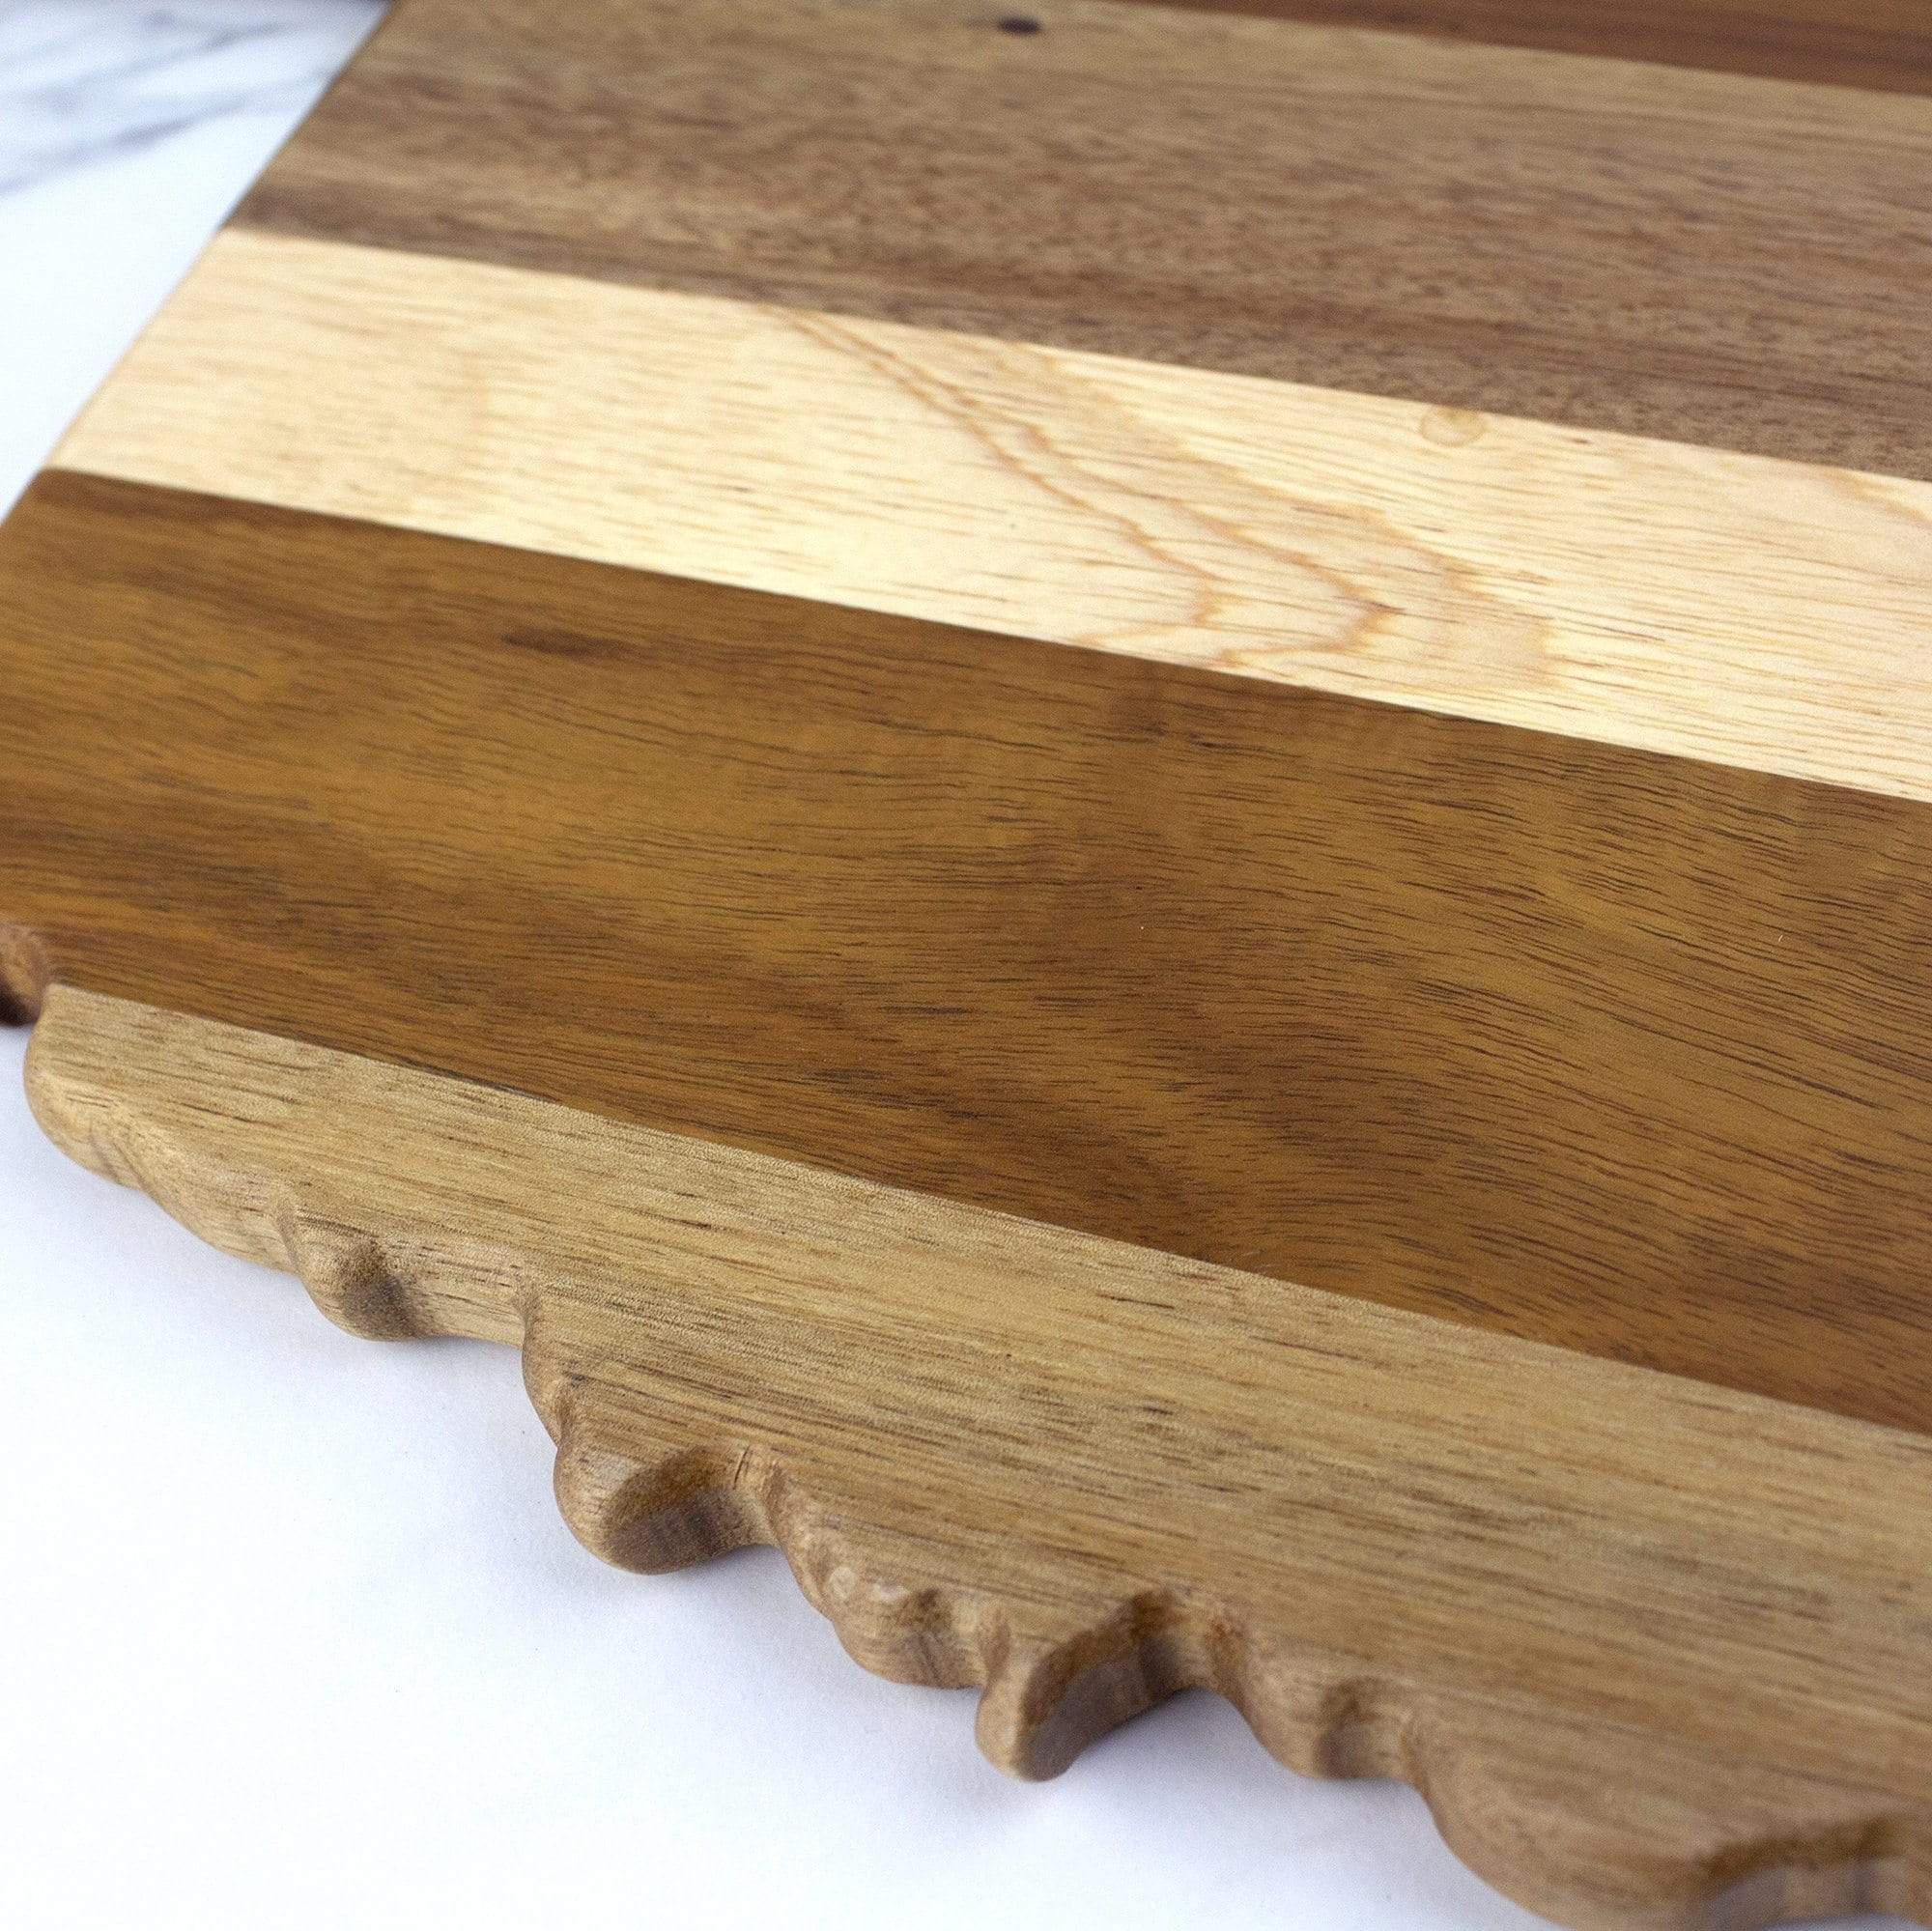 https://totallybamboo.com/cdn/shop/products/rock-branchr-shiplap-series-oklahoma-state-shaped-wood-serving-and-cutting-board-totally-bamboo-891351.jpg?v=1627834143